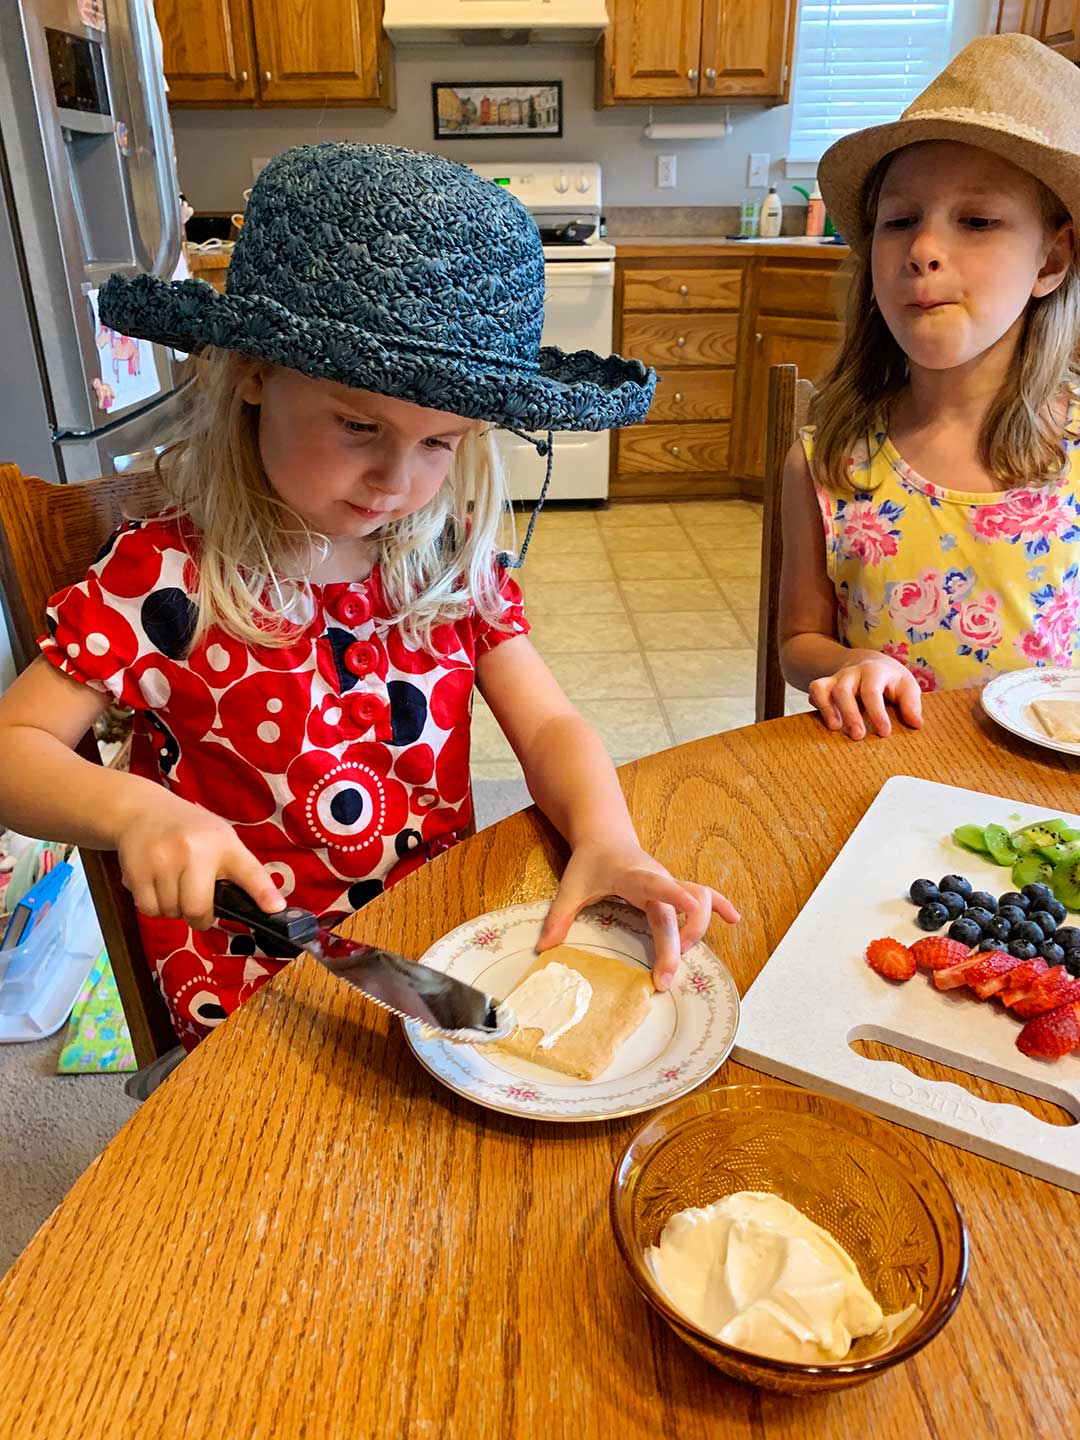 Two children in floral dresses and hats decorating pieces of fruit pizza with frosting, strawberries, blueberries, and kiwi on a decorative plates.